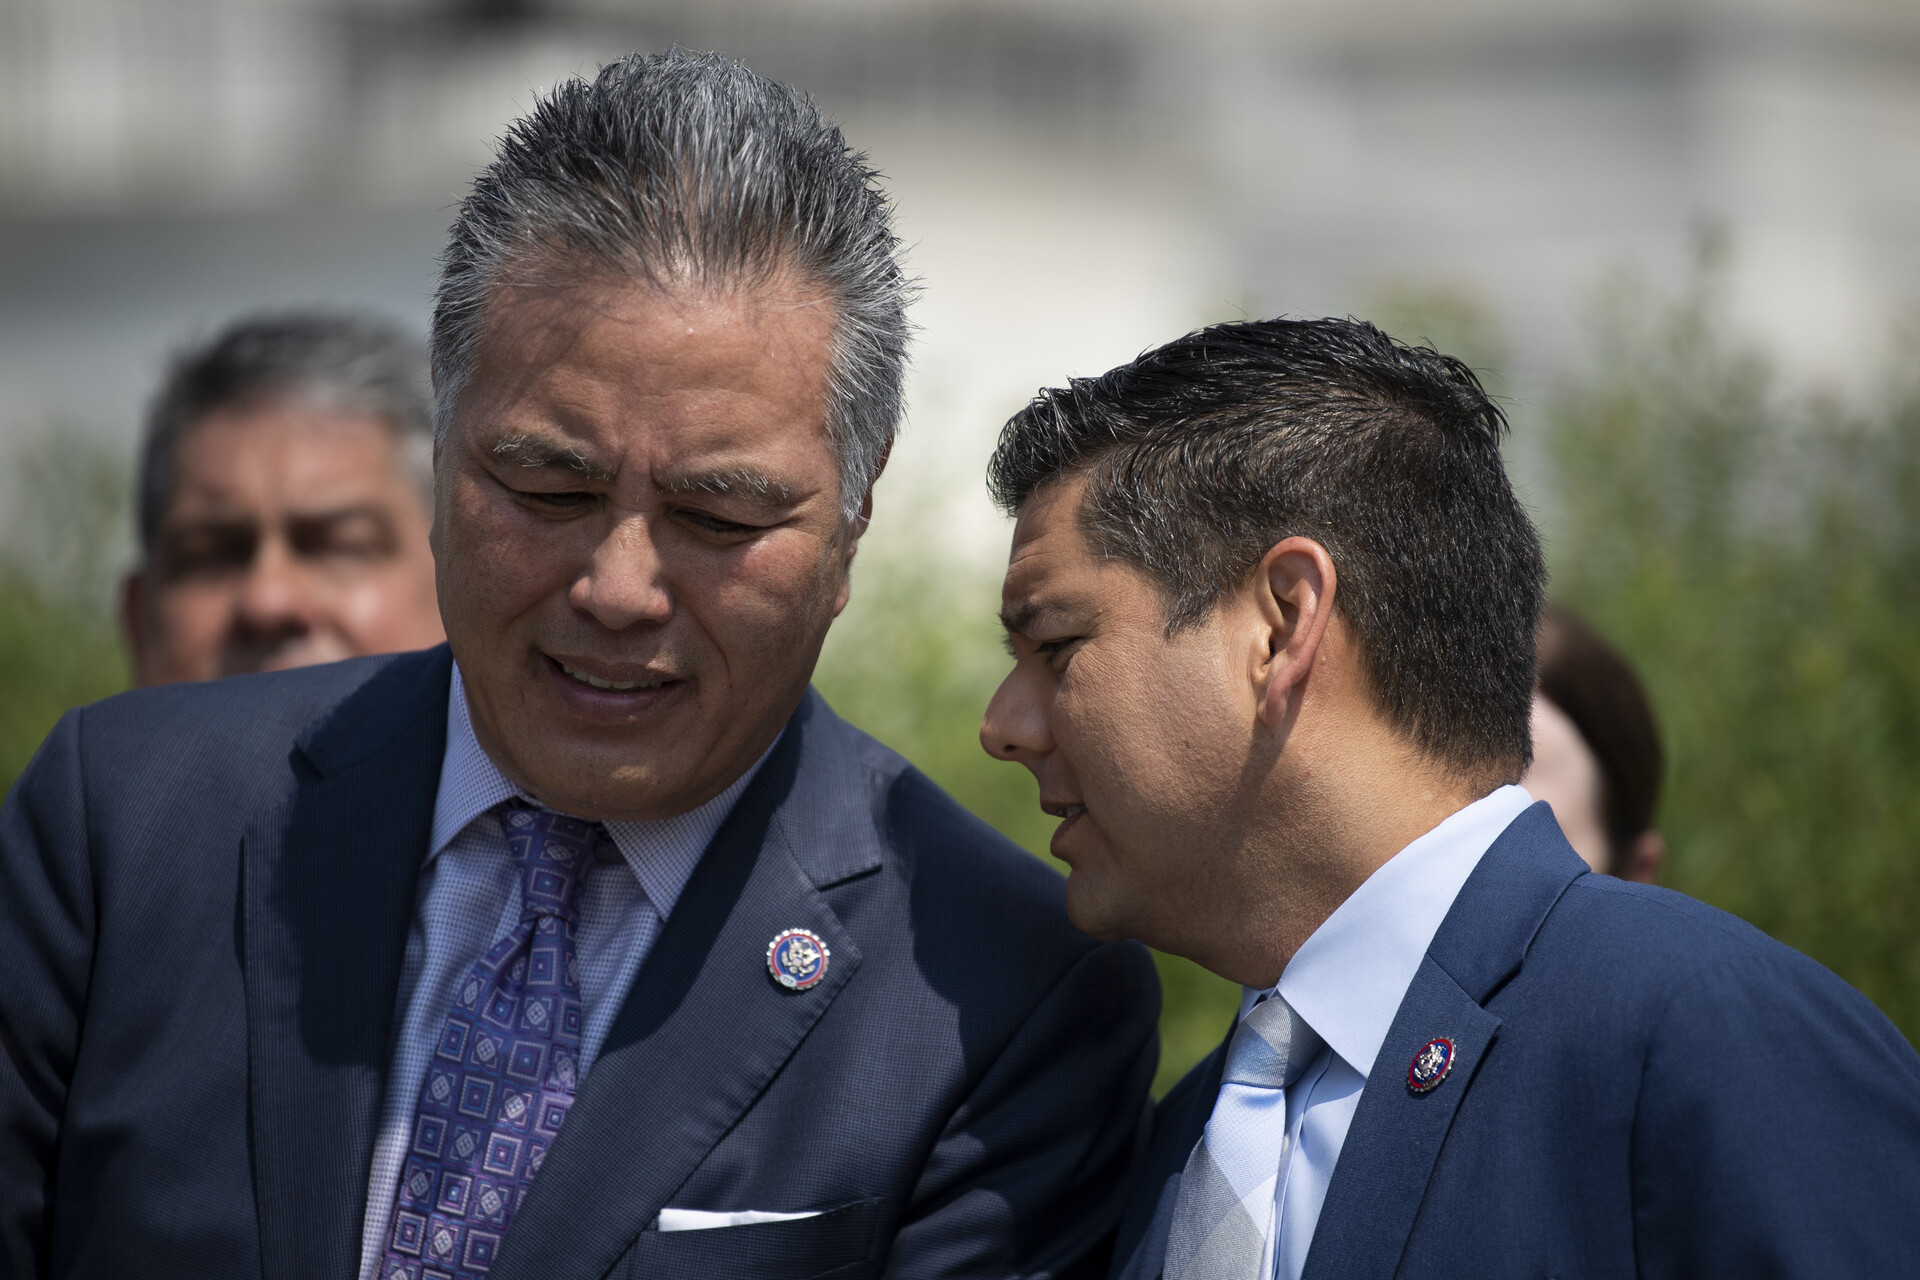 A close-up of two middle-aged men in blue suits outside on a sunny day, both with trim, dark haircuts. The man on the right, who appears Latino, speaks into the ear of the other, who appears Asian. 